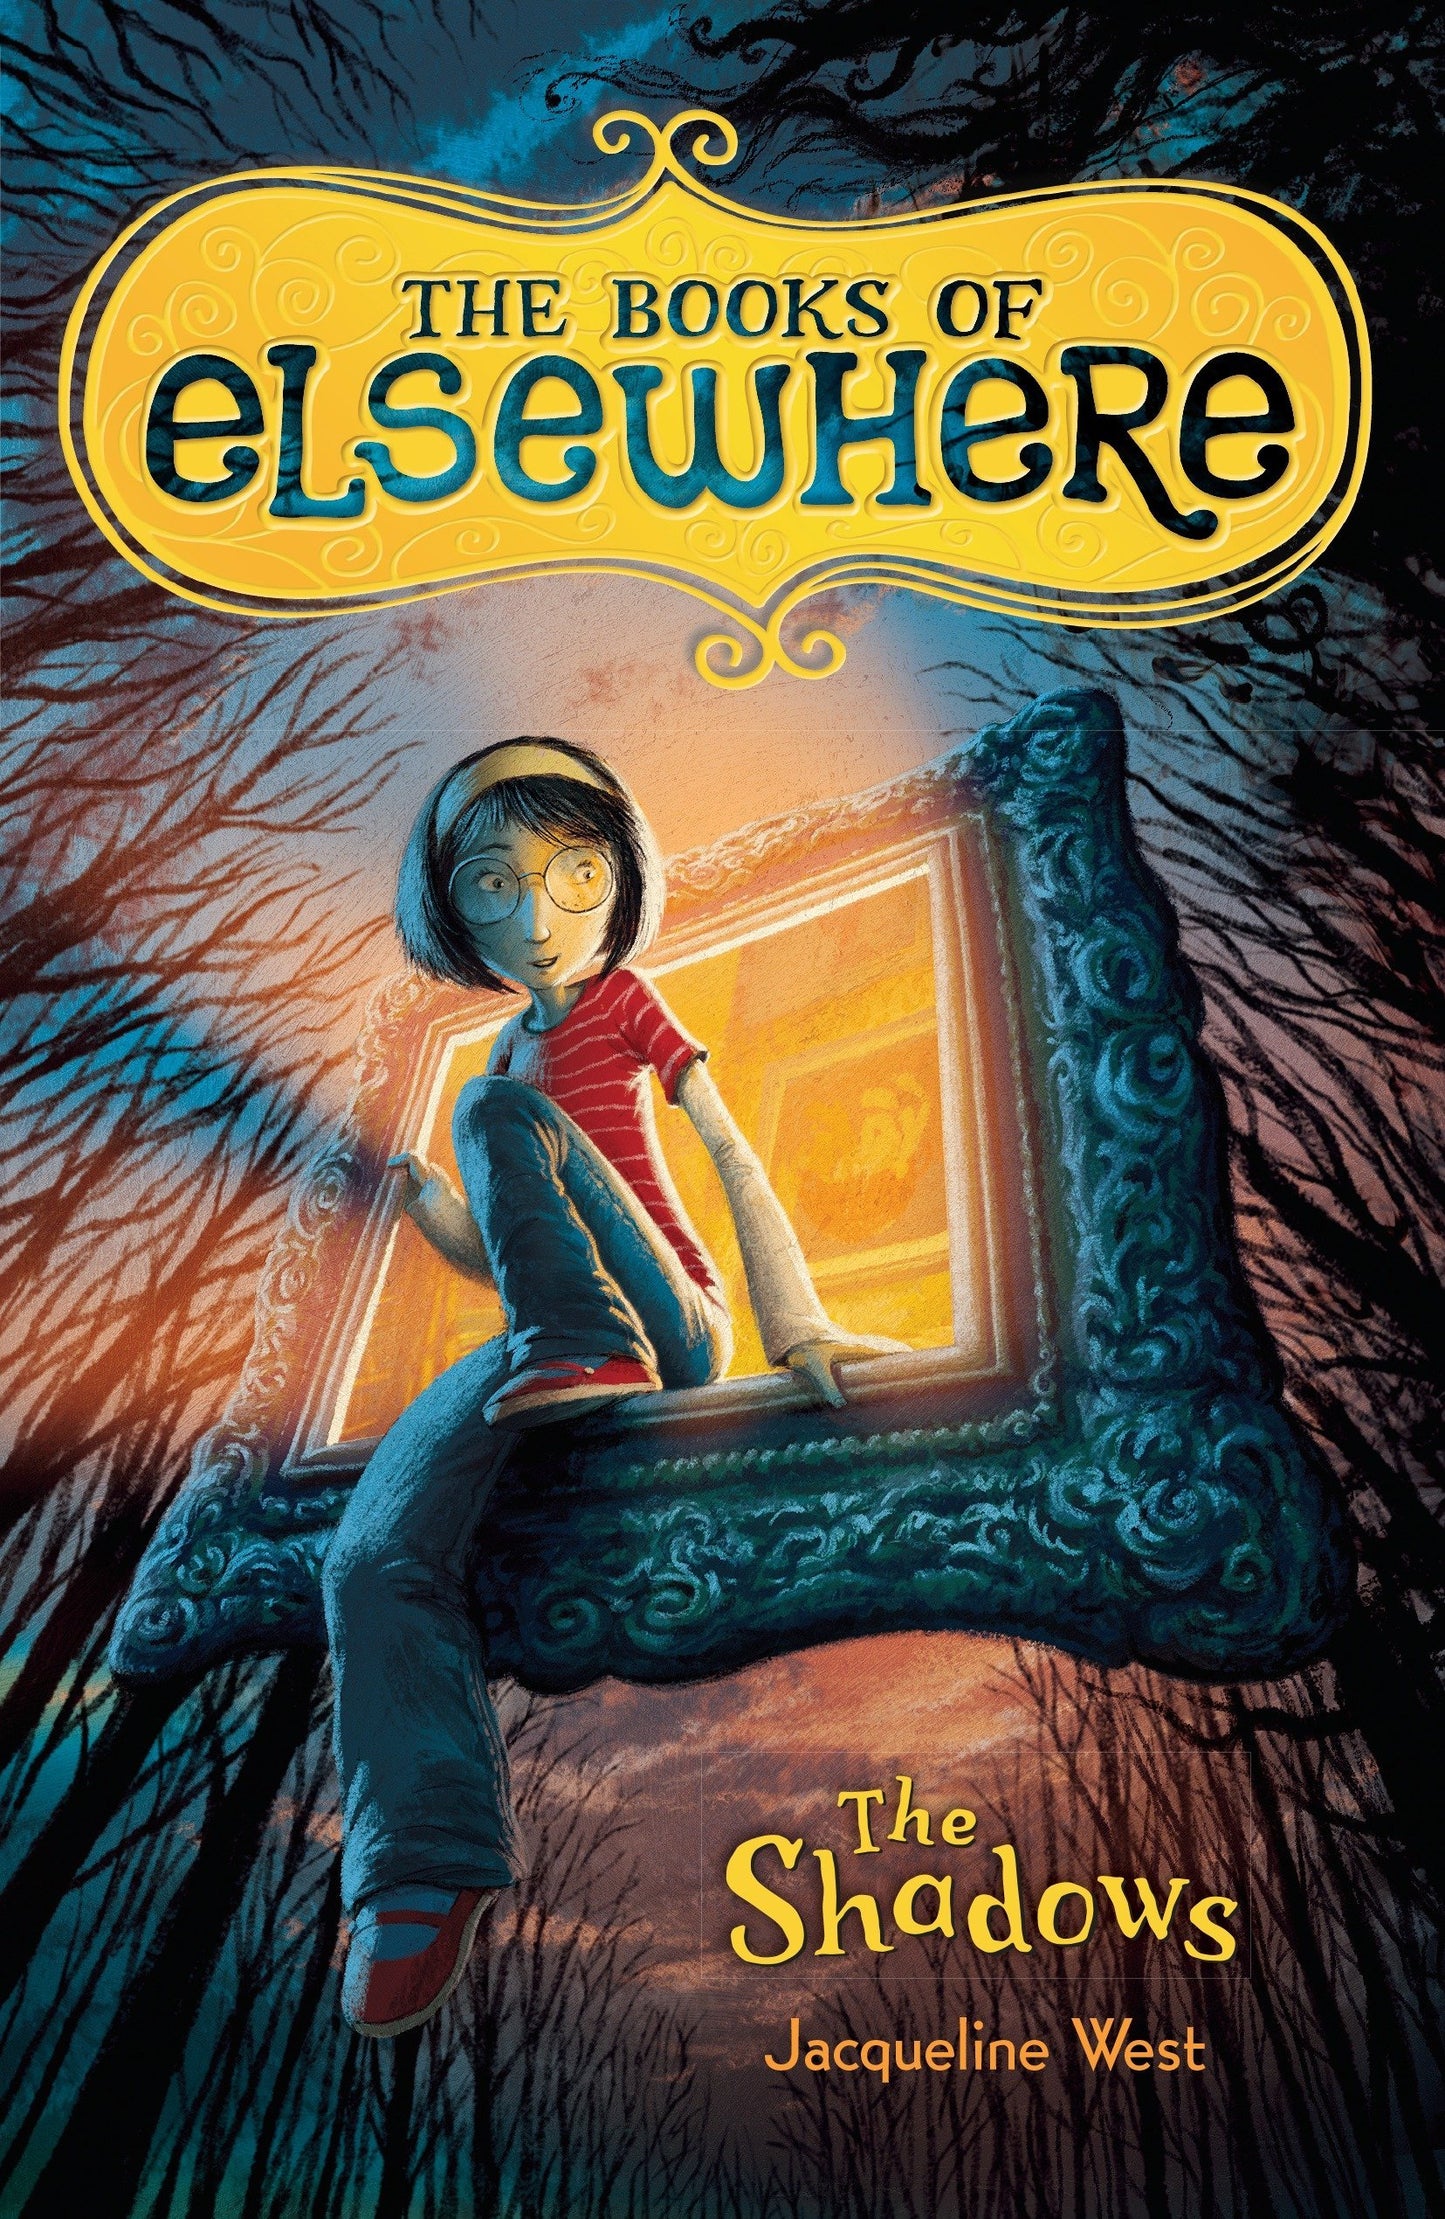 The Shadows : The Books of Elsewhere, Book 1 of 5 (Hardcover) Jacqueline West